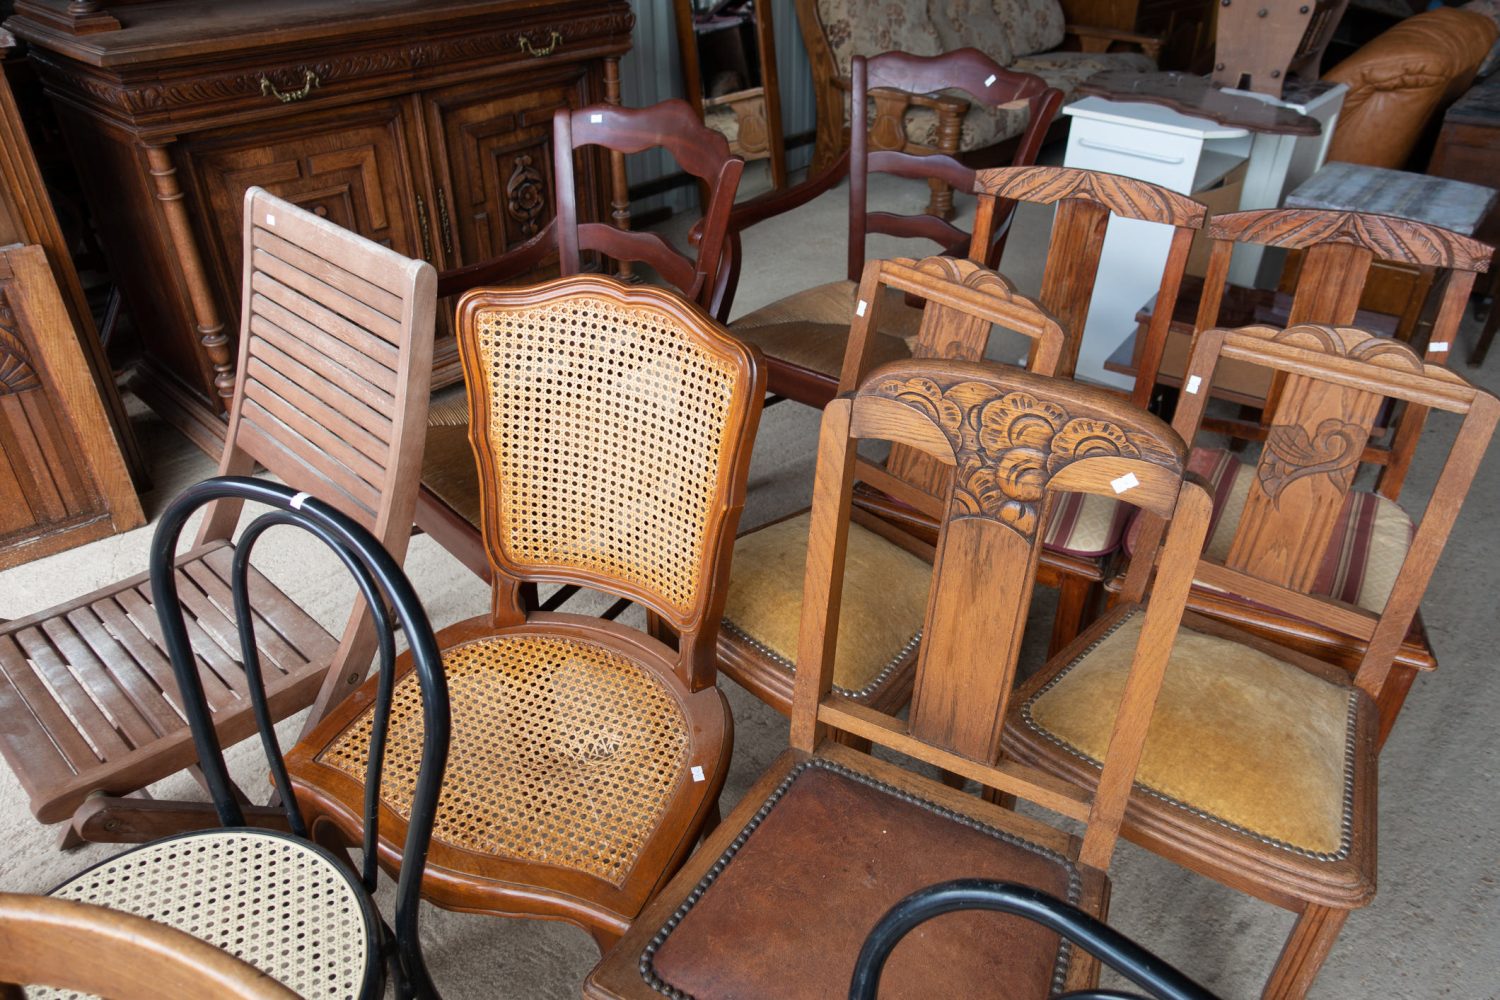 Old Chairs in thrift shop